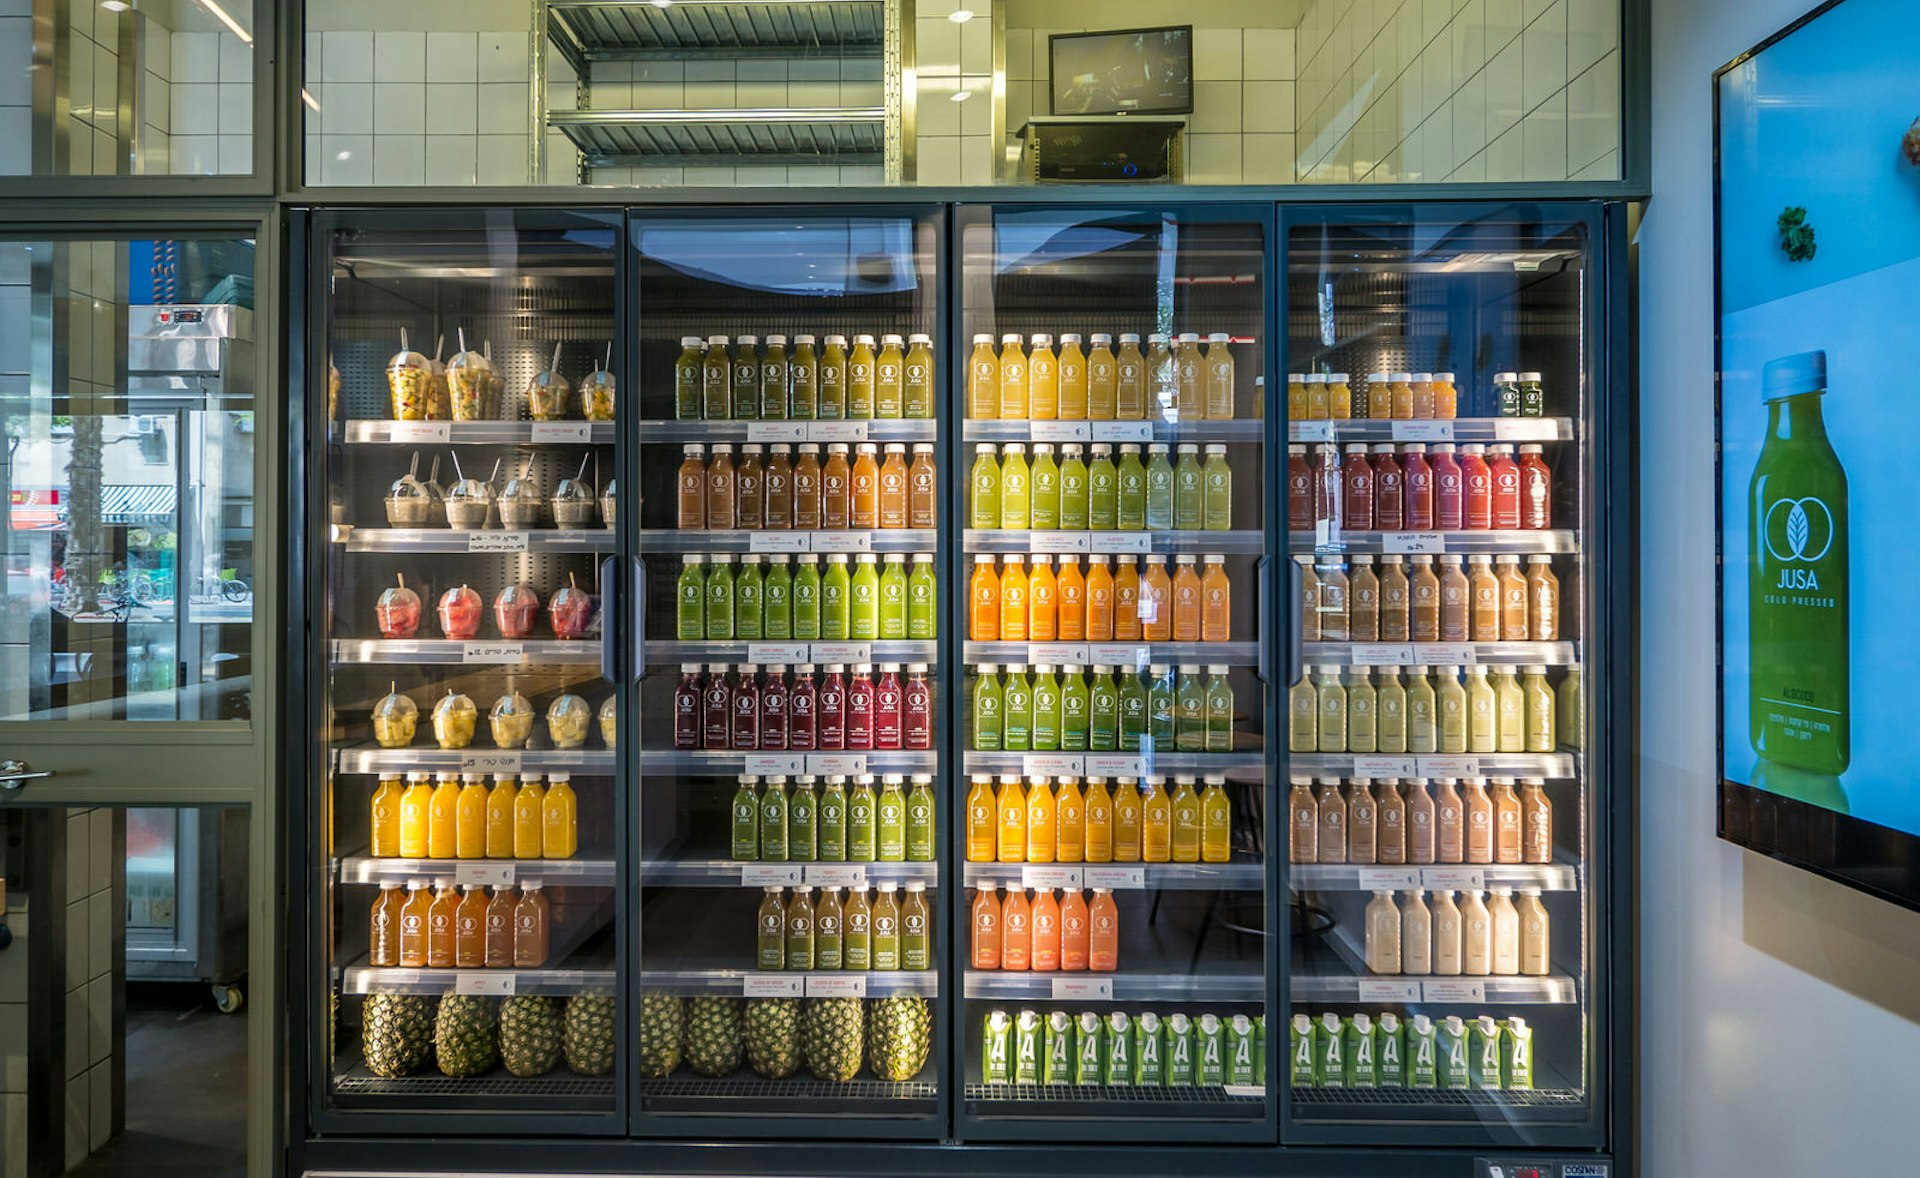 Refrigerated shelves of juices available at Jusa in Tel Aviv. Image by Jusa